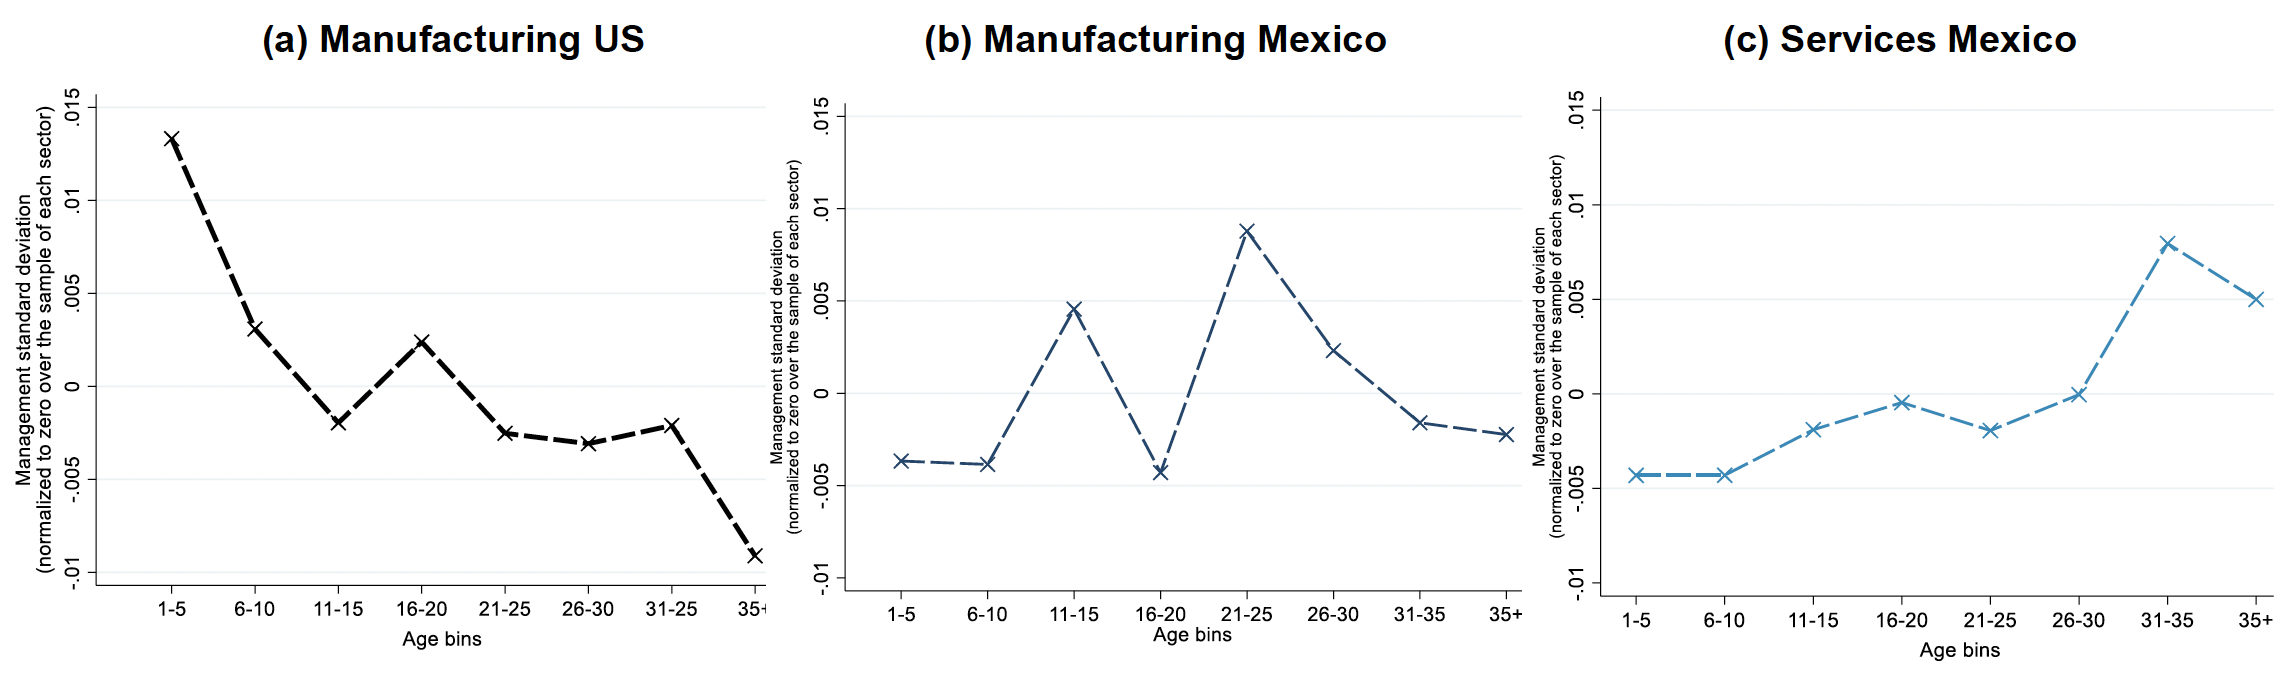 Misallocation explains worse management among Mexican firms 4